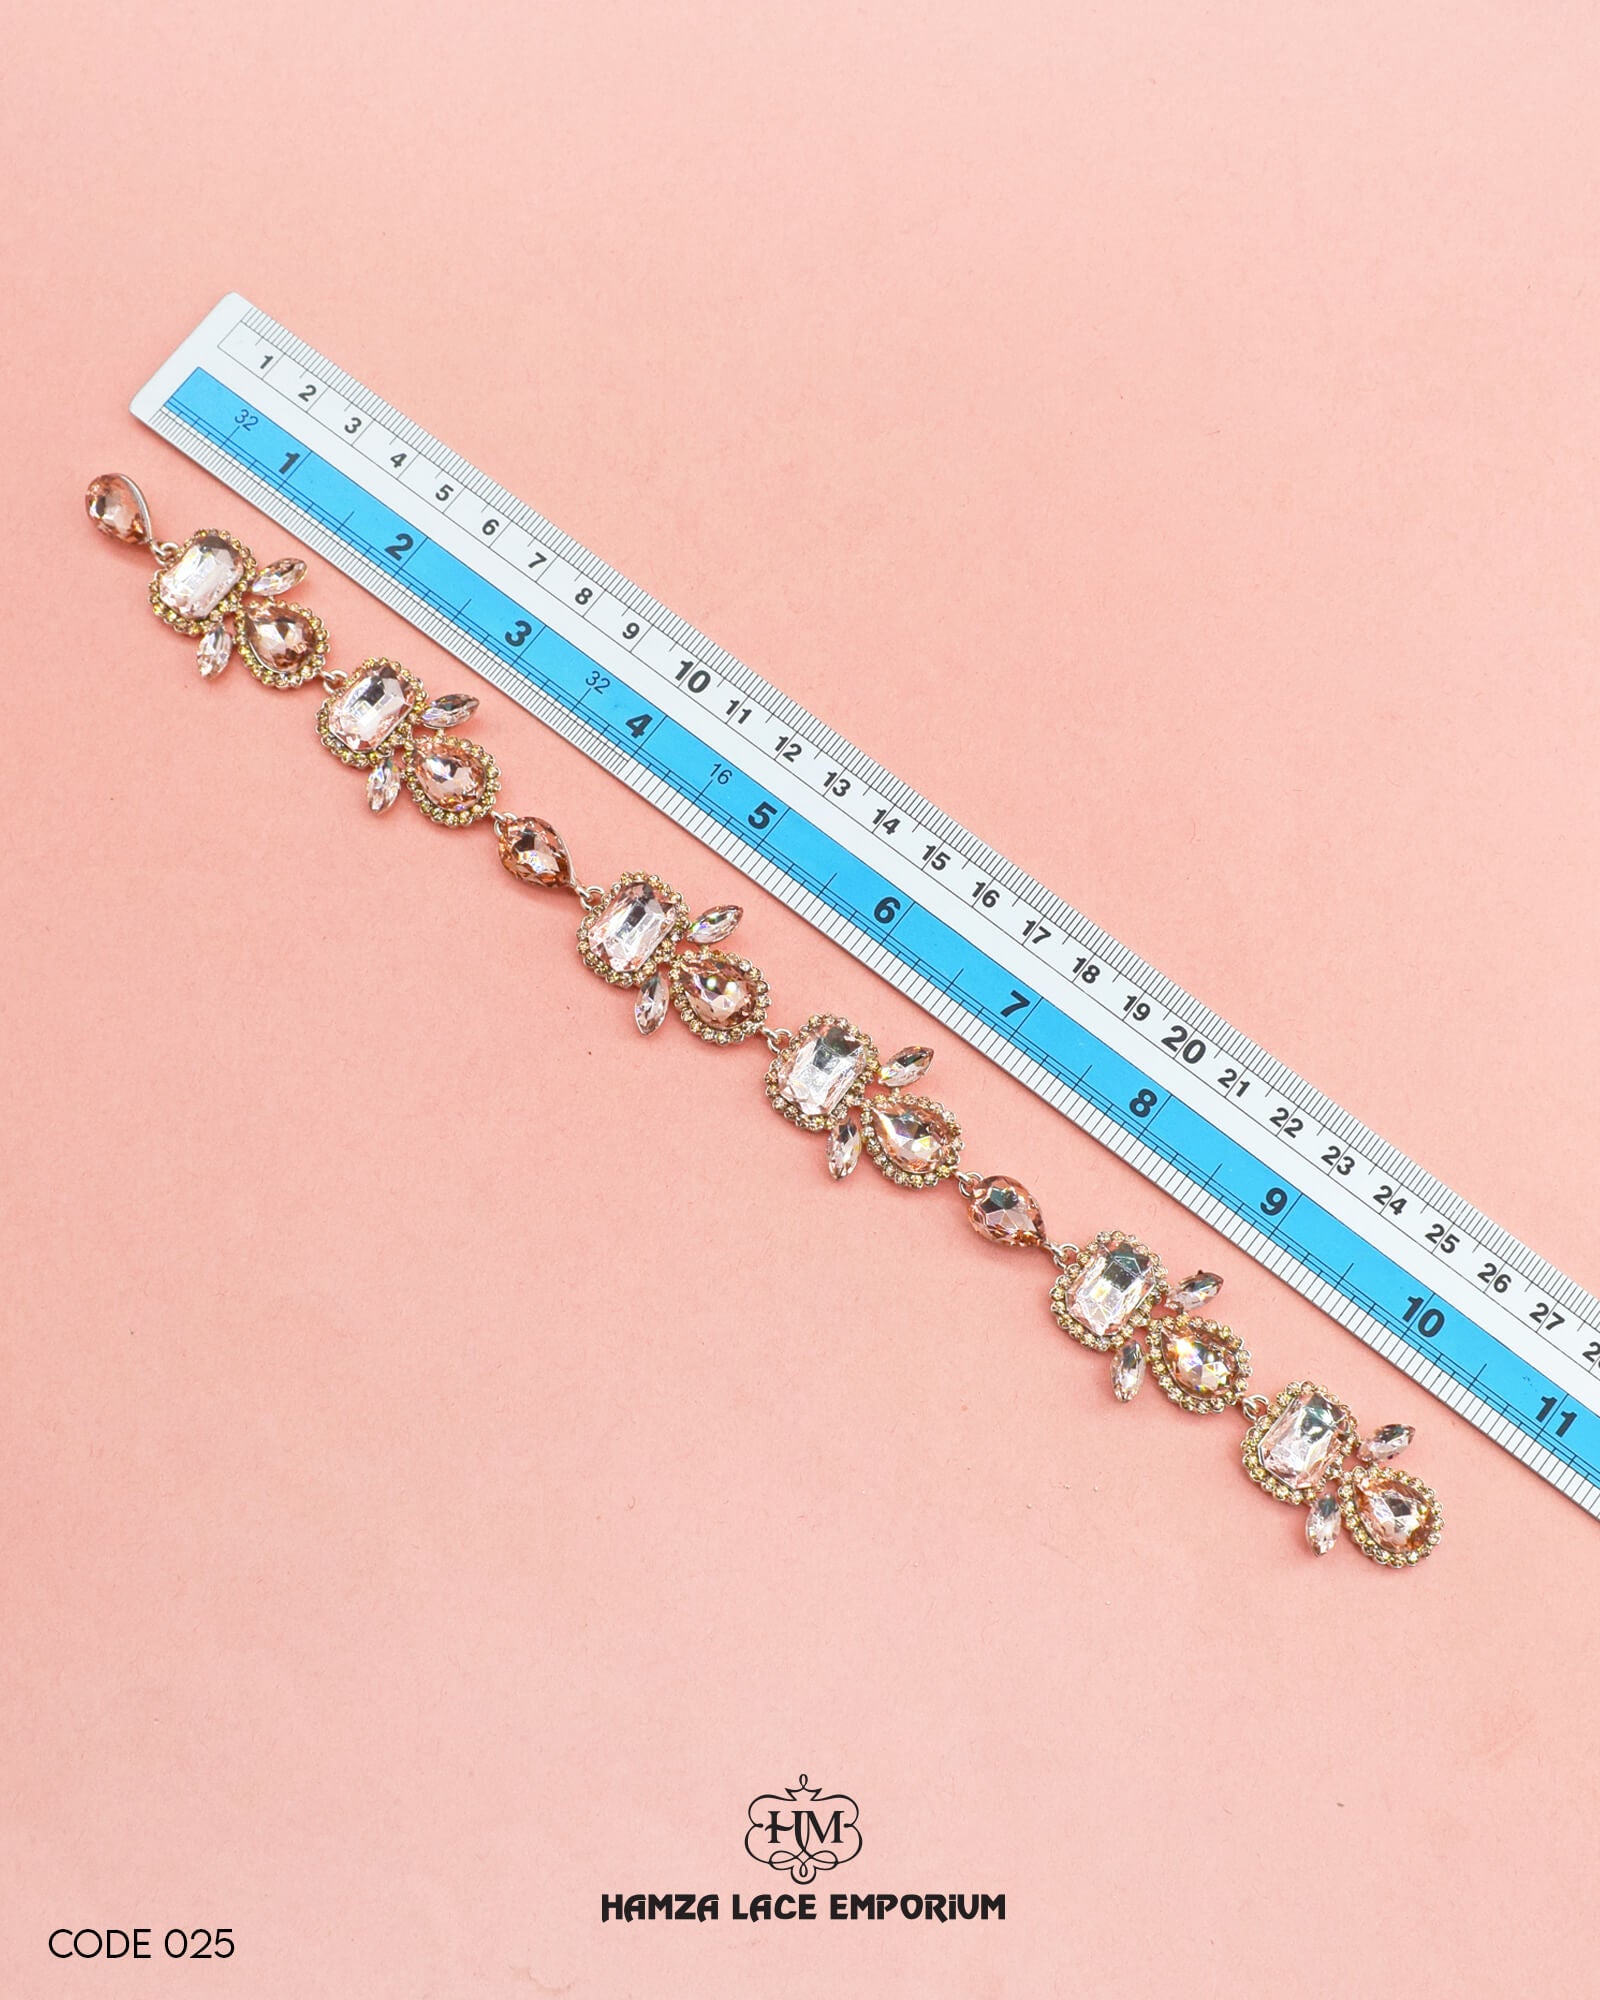 The 'Button Patti 025' size is showcased using a ruler for precise measurement.